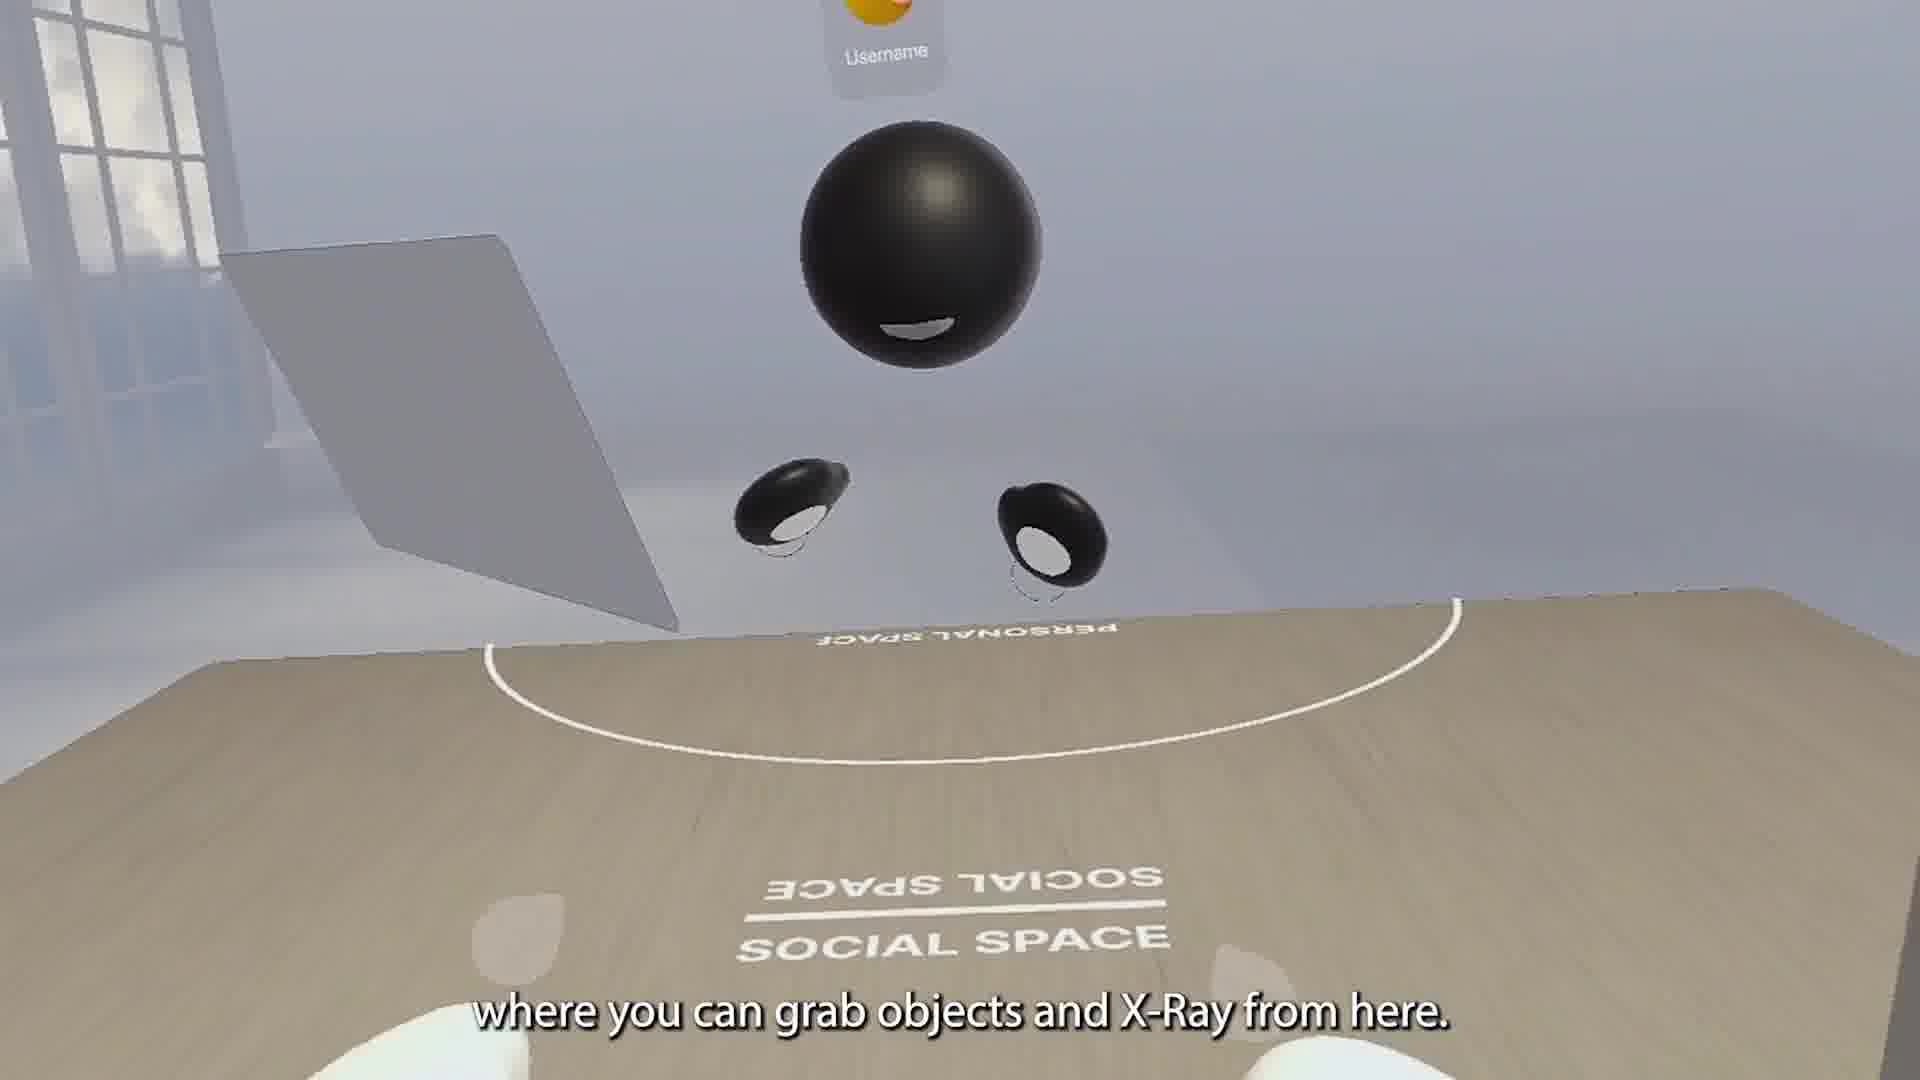 A video game with a black ball and some speakers